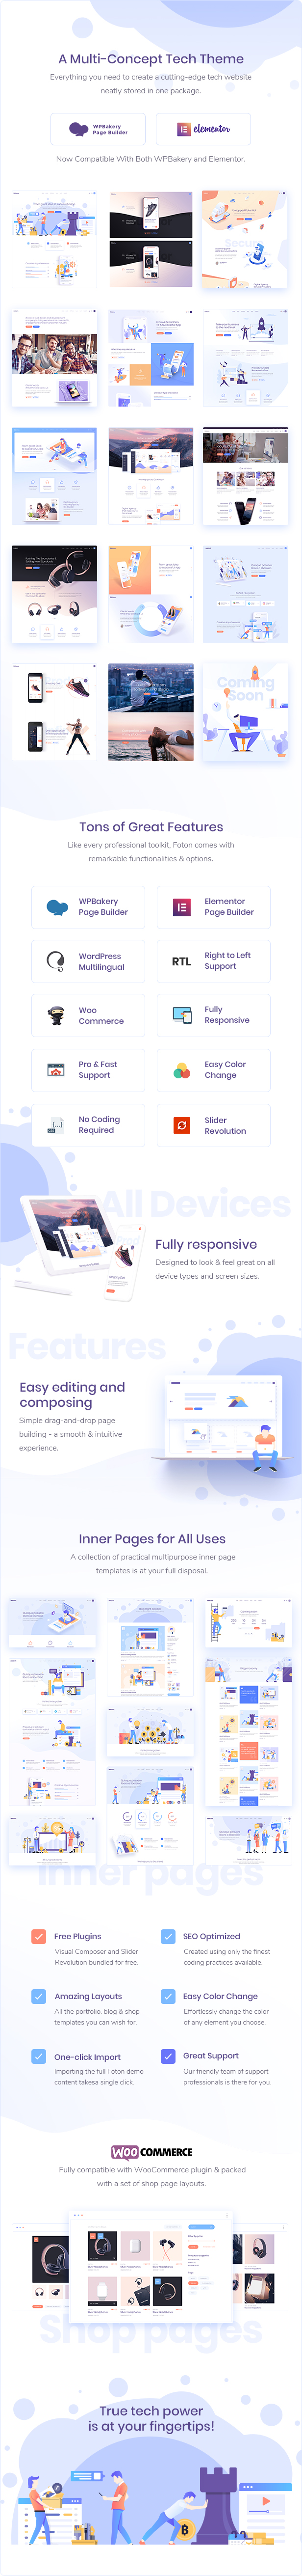 Foton - Software and App Landing Page Theme - 2